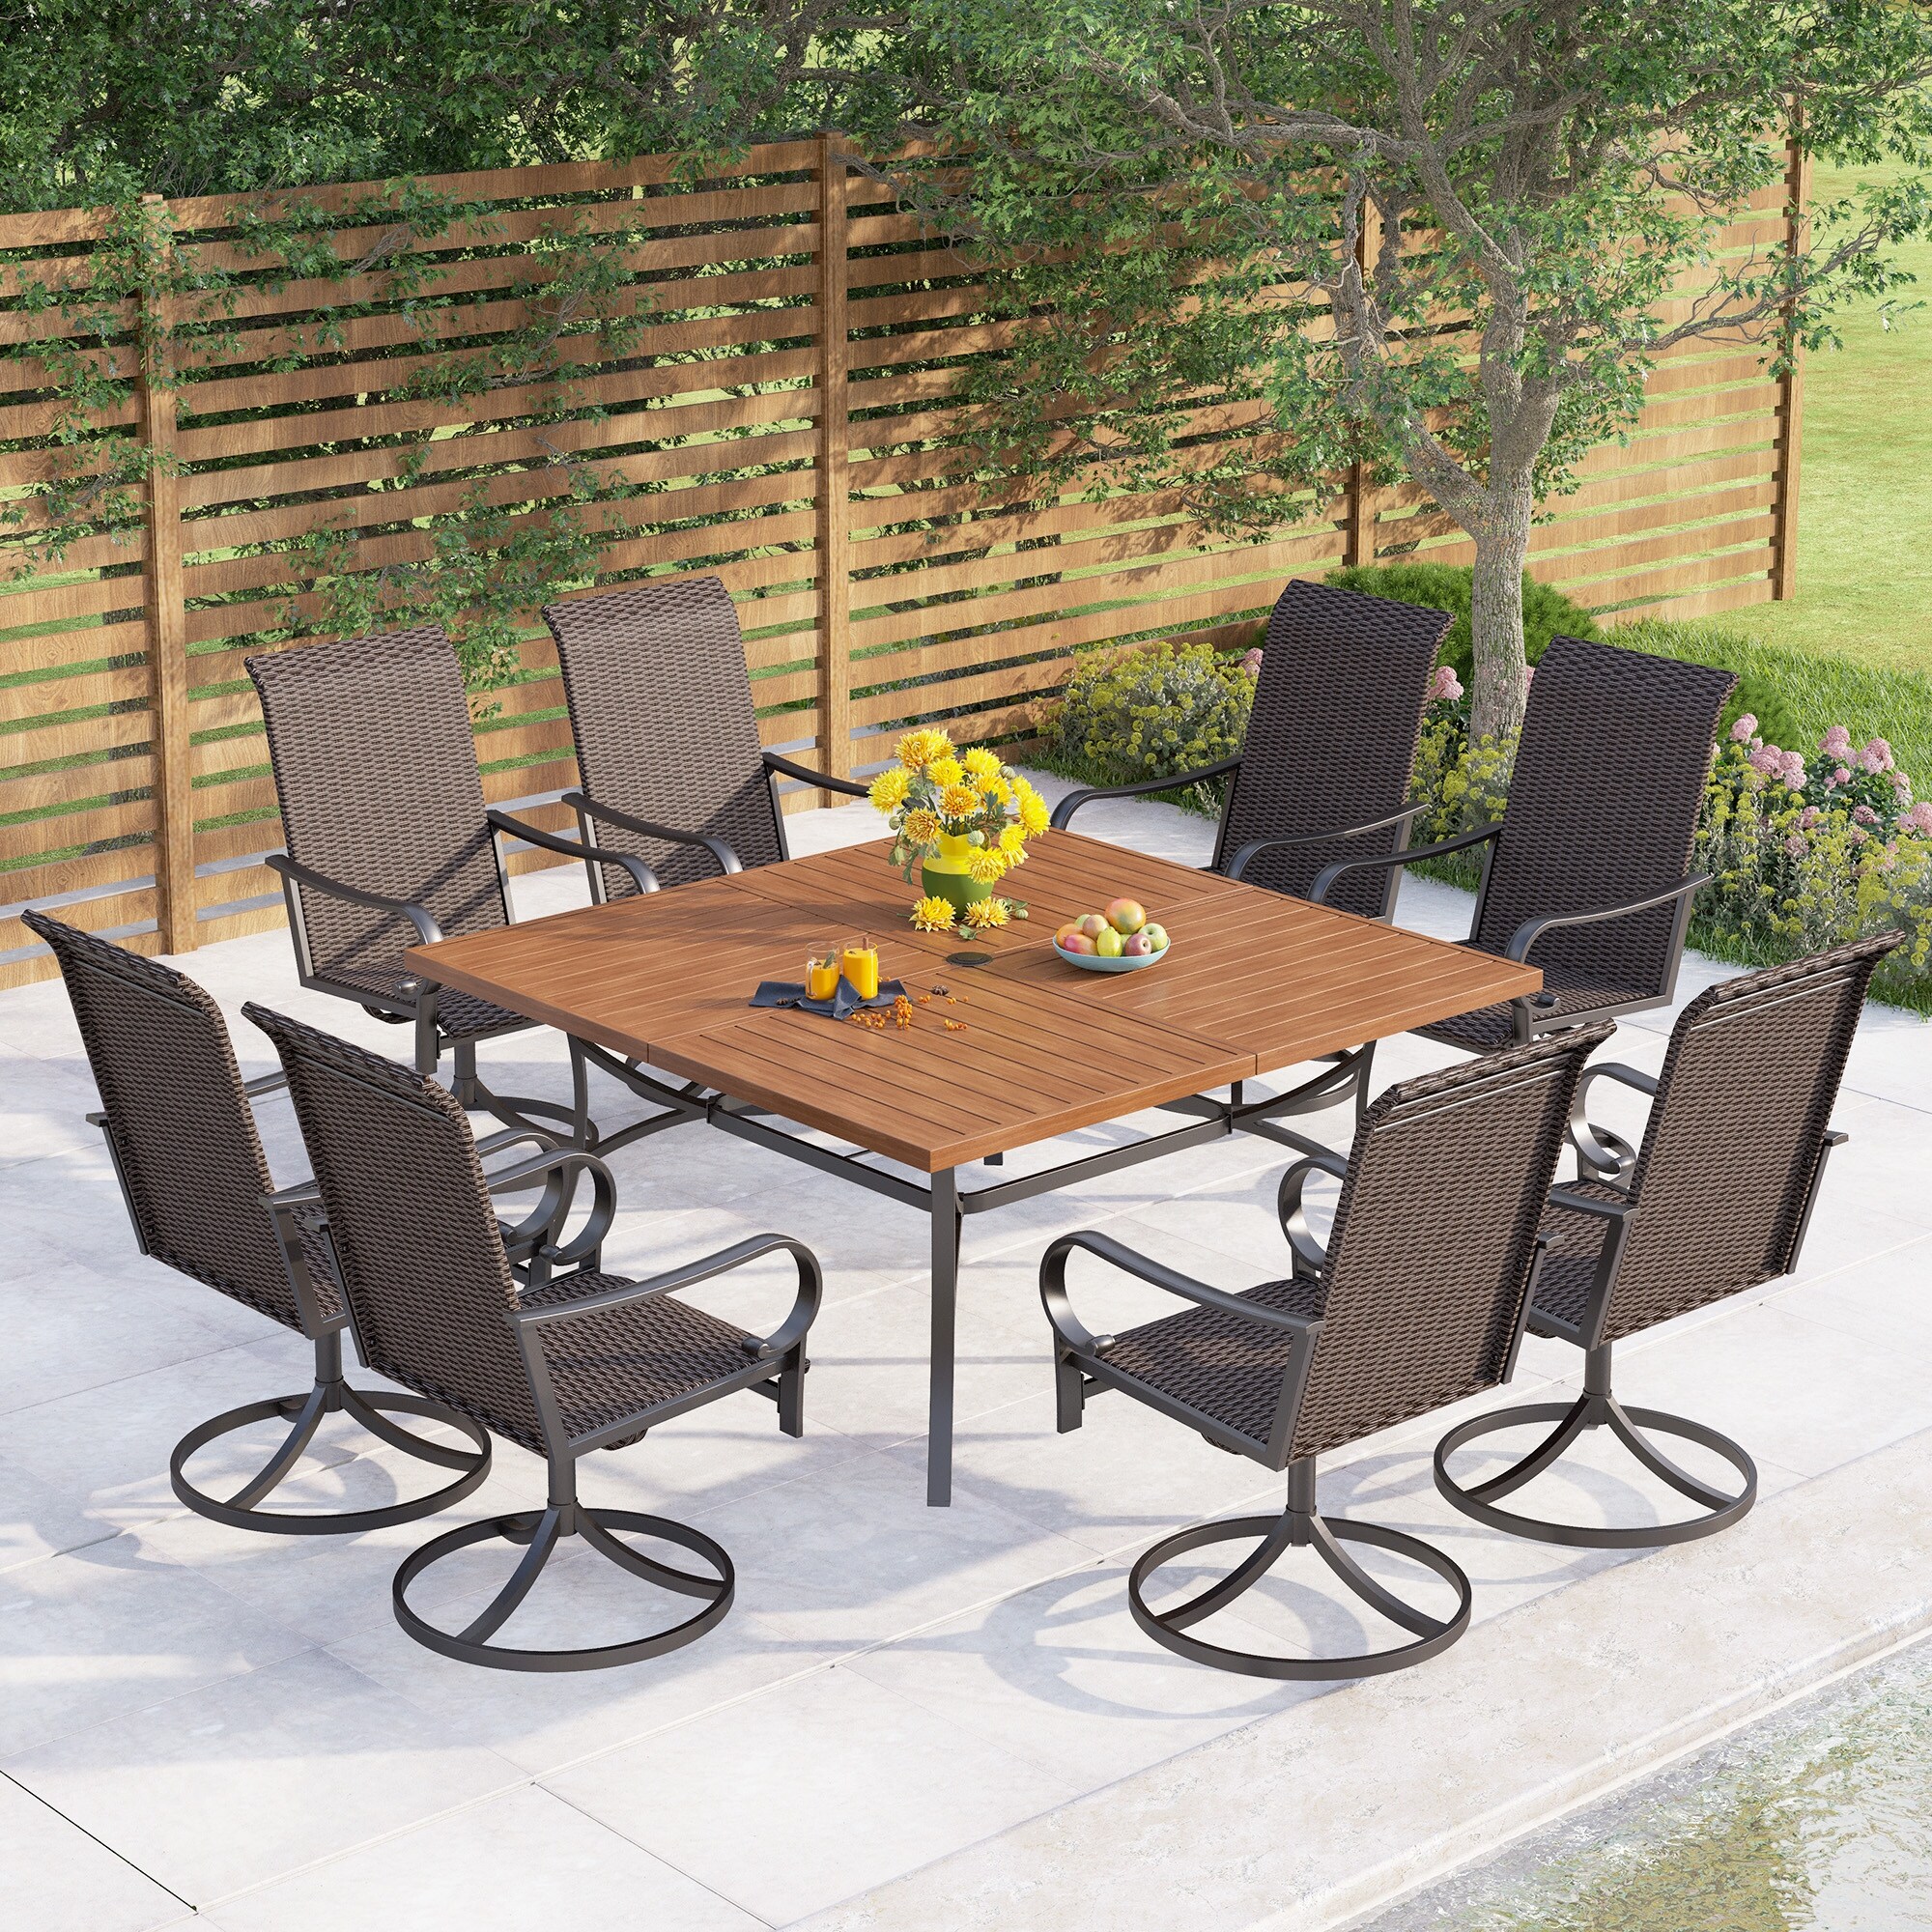 9-piece Patio Dining Set  60 Inch Square Metal Table And 8 Rattan Dining Chairs